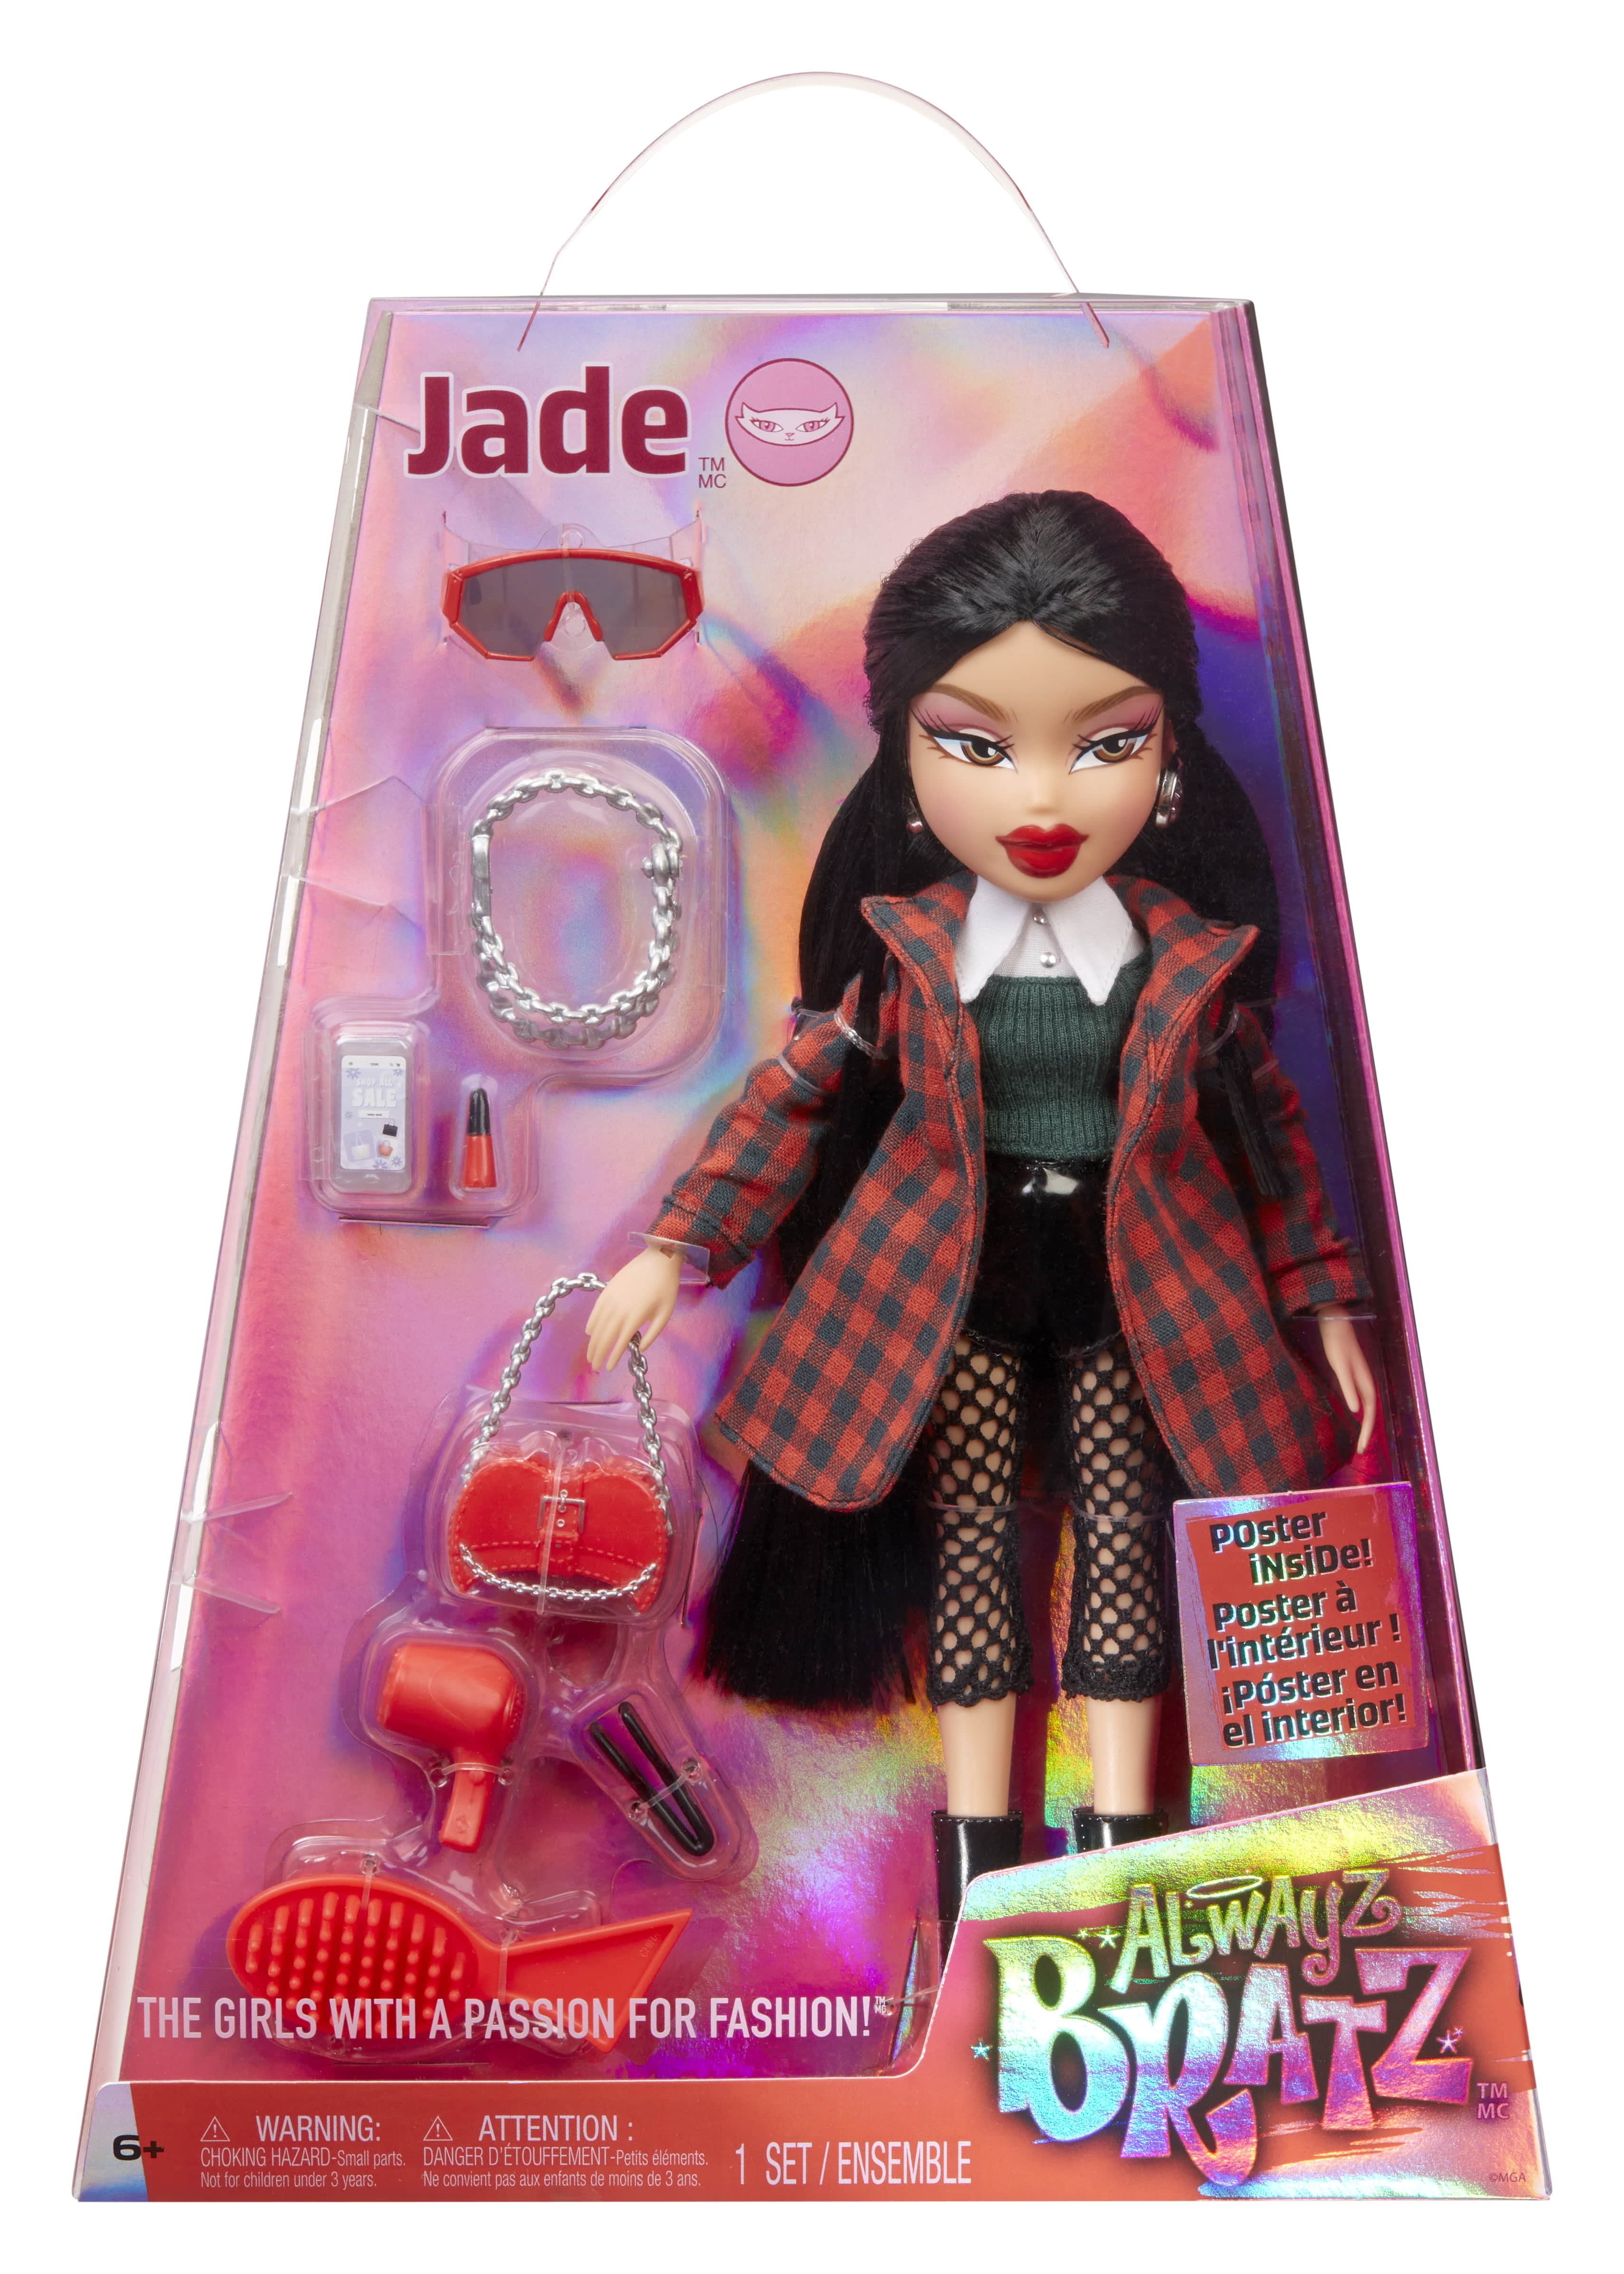  Bratz Original Fashion Doll Fianna Series 3 with 2 Outfits and  Poster, Collectors Ages 6 7 8 9 10+ : Toys & Games